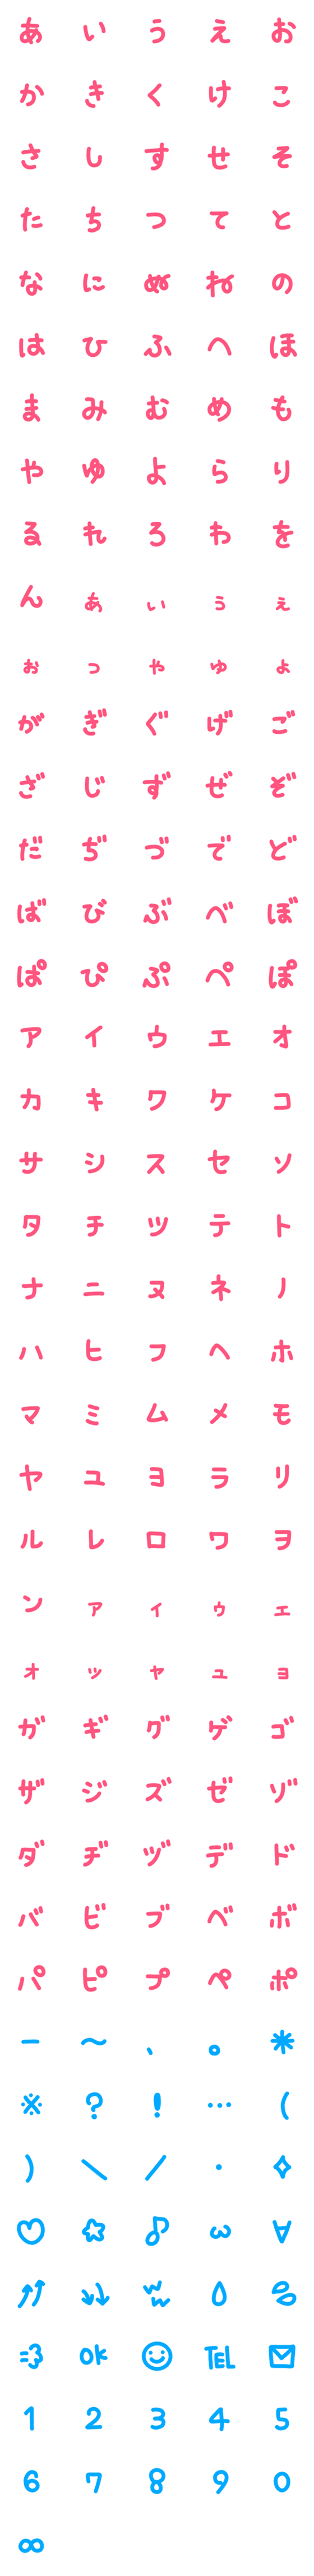 [LINE絵文字]どんな背景にも合うデコ絵文字1の画像一覧